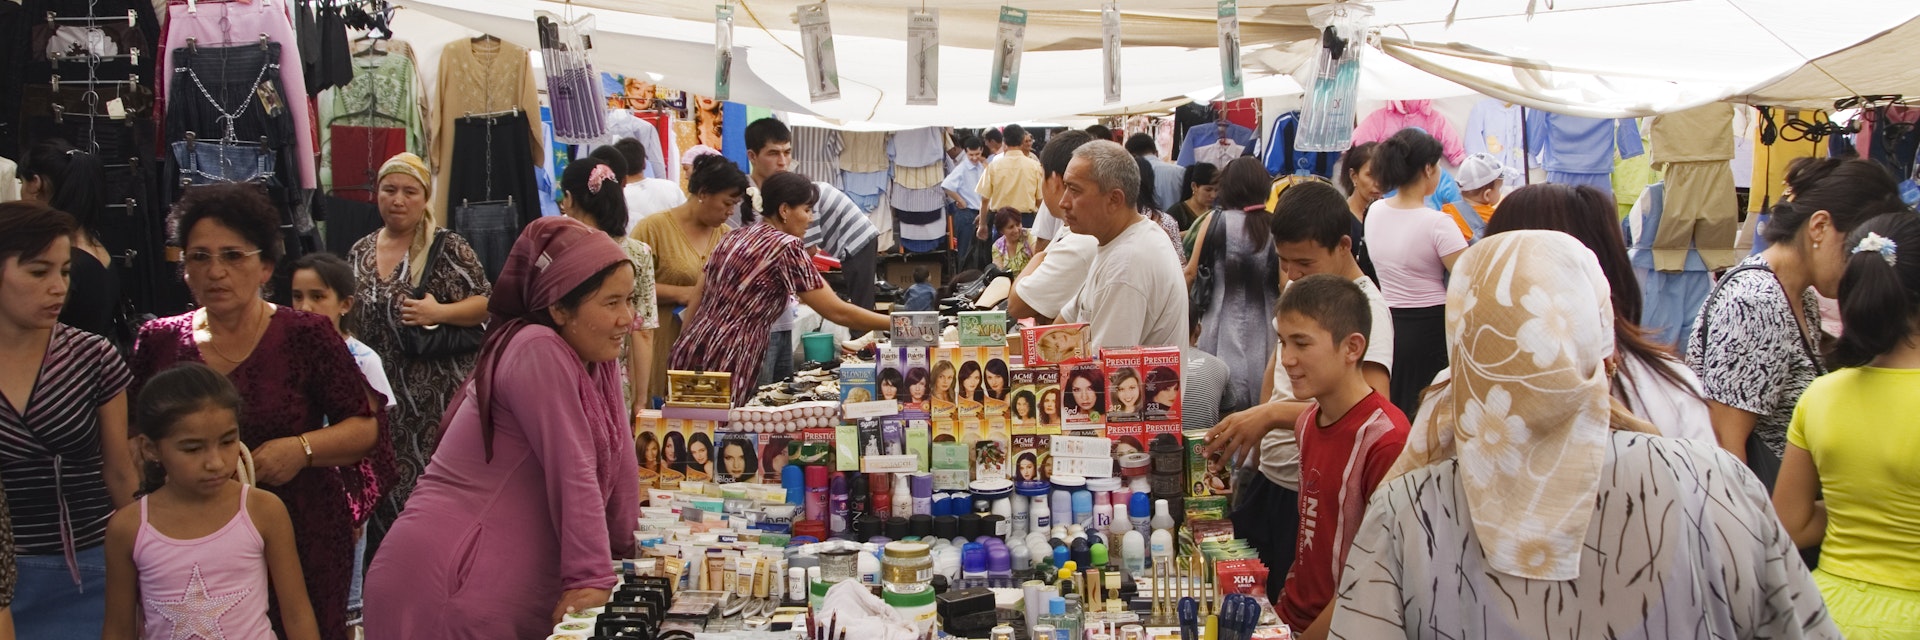 People walking around woman selling cosmetics and personal hygiene products at covered stall at Chorsu Bazaar.